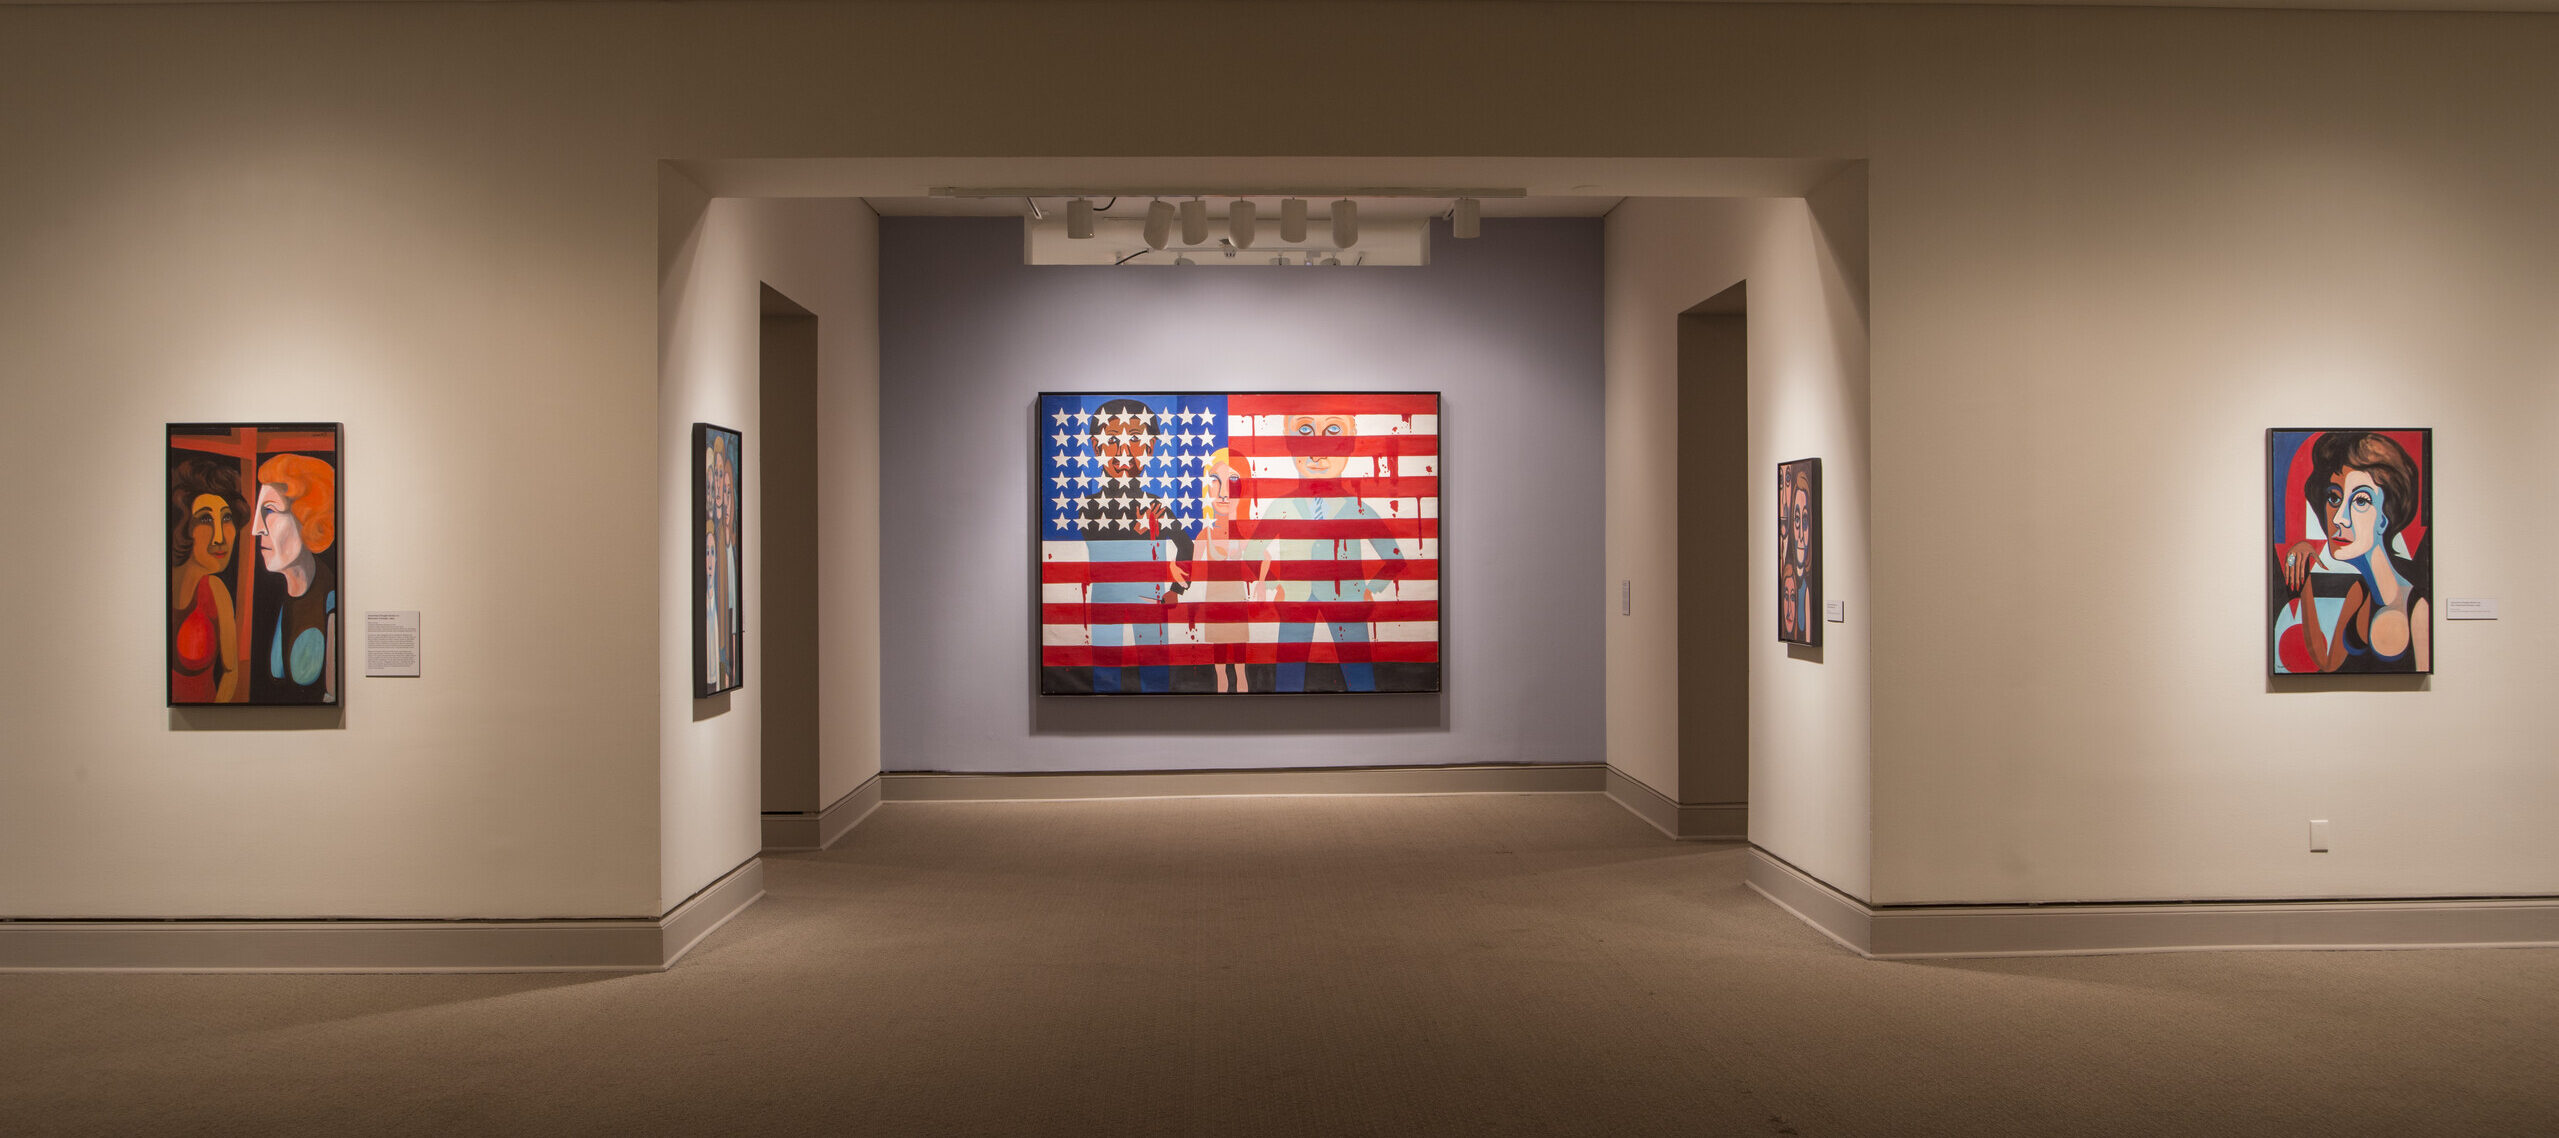 Installation view of a gallery space. A large painting showing an American flag splattered in blood and with people with a light skin tone standing behind the flag is hanging in the middle of the room.